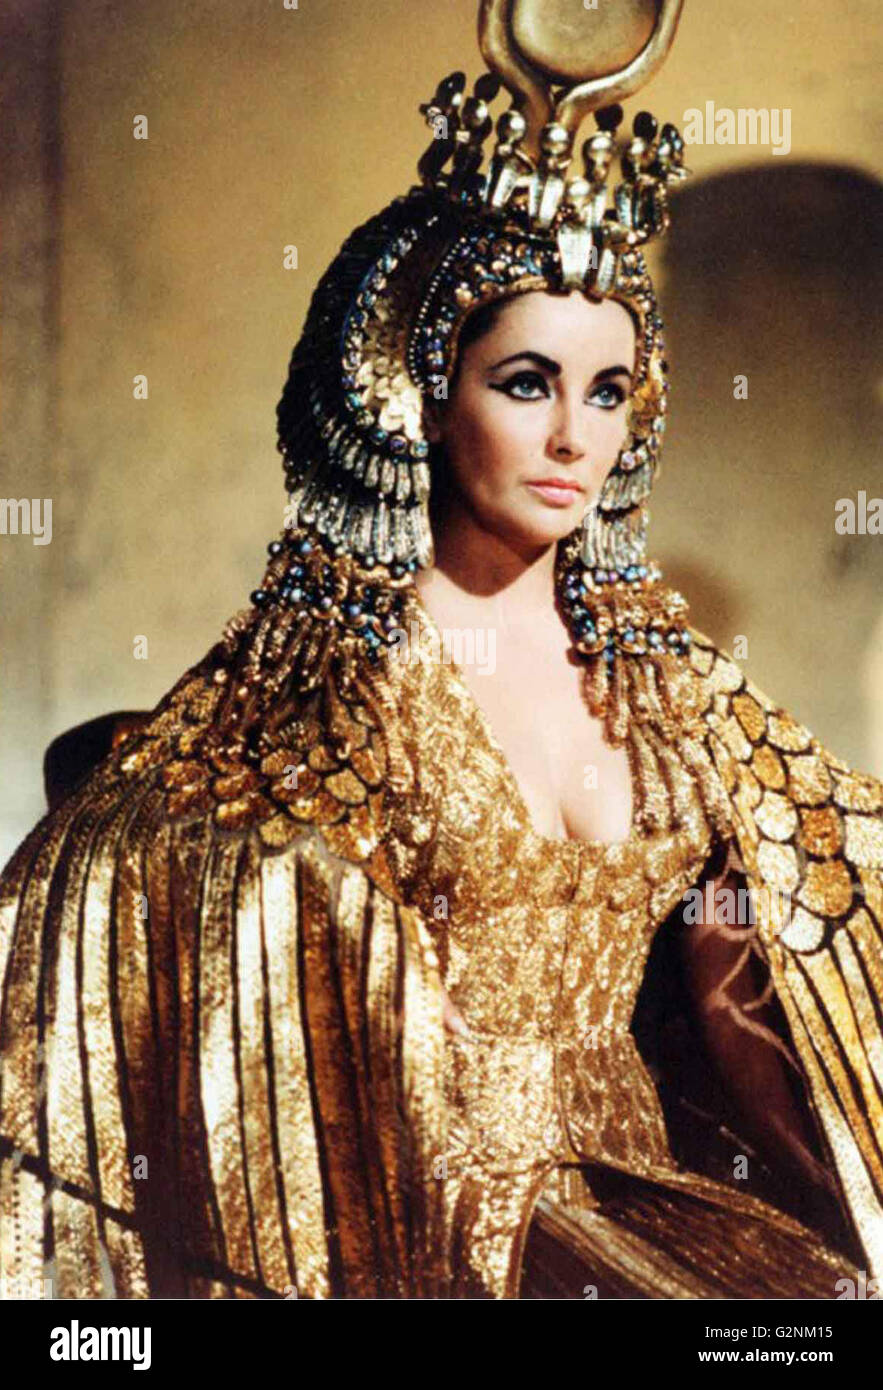 Elizabeth Taylor as Cleopatra in the 1963 epic drama film directed by Joseph L. Mankiewicz. Stock Photo